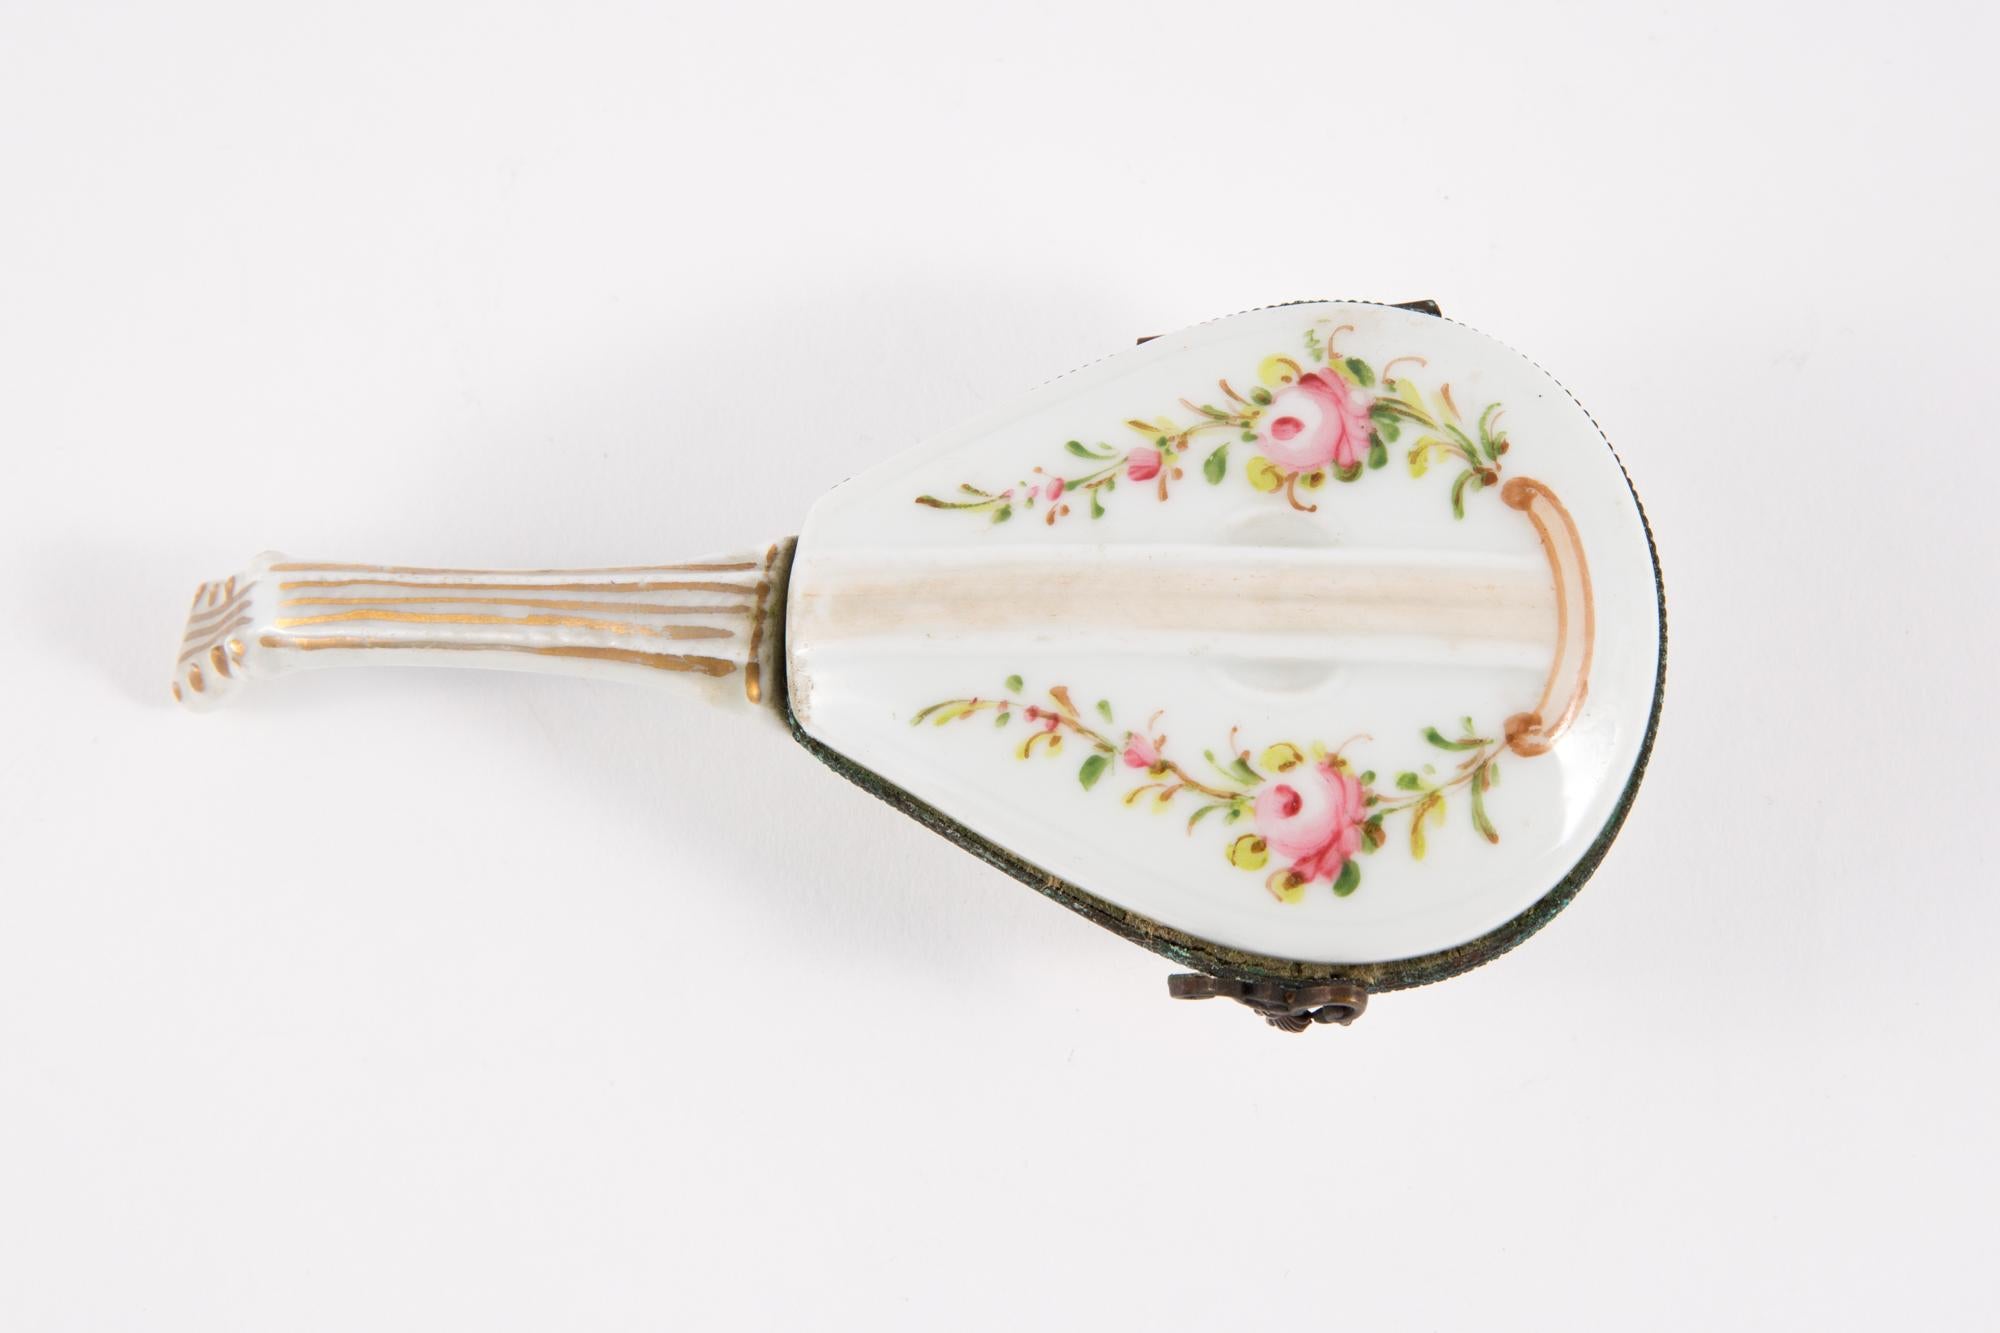 Porcelain mandolin pill box featuring a metal frame a crown clasp and a polychrome floral decor.
In excellent vintage condition. Made in France. 
Height 1.5in. (4cm)
Length 5.5in. (14cm)
Width 2.3in. (6cm)
We guarantee you will receive this gorgeous